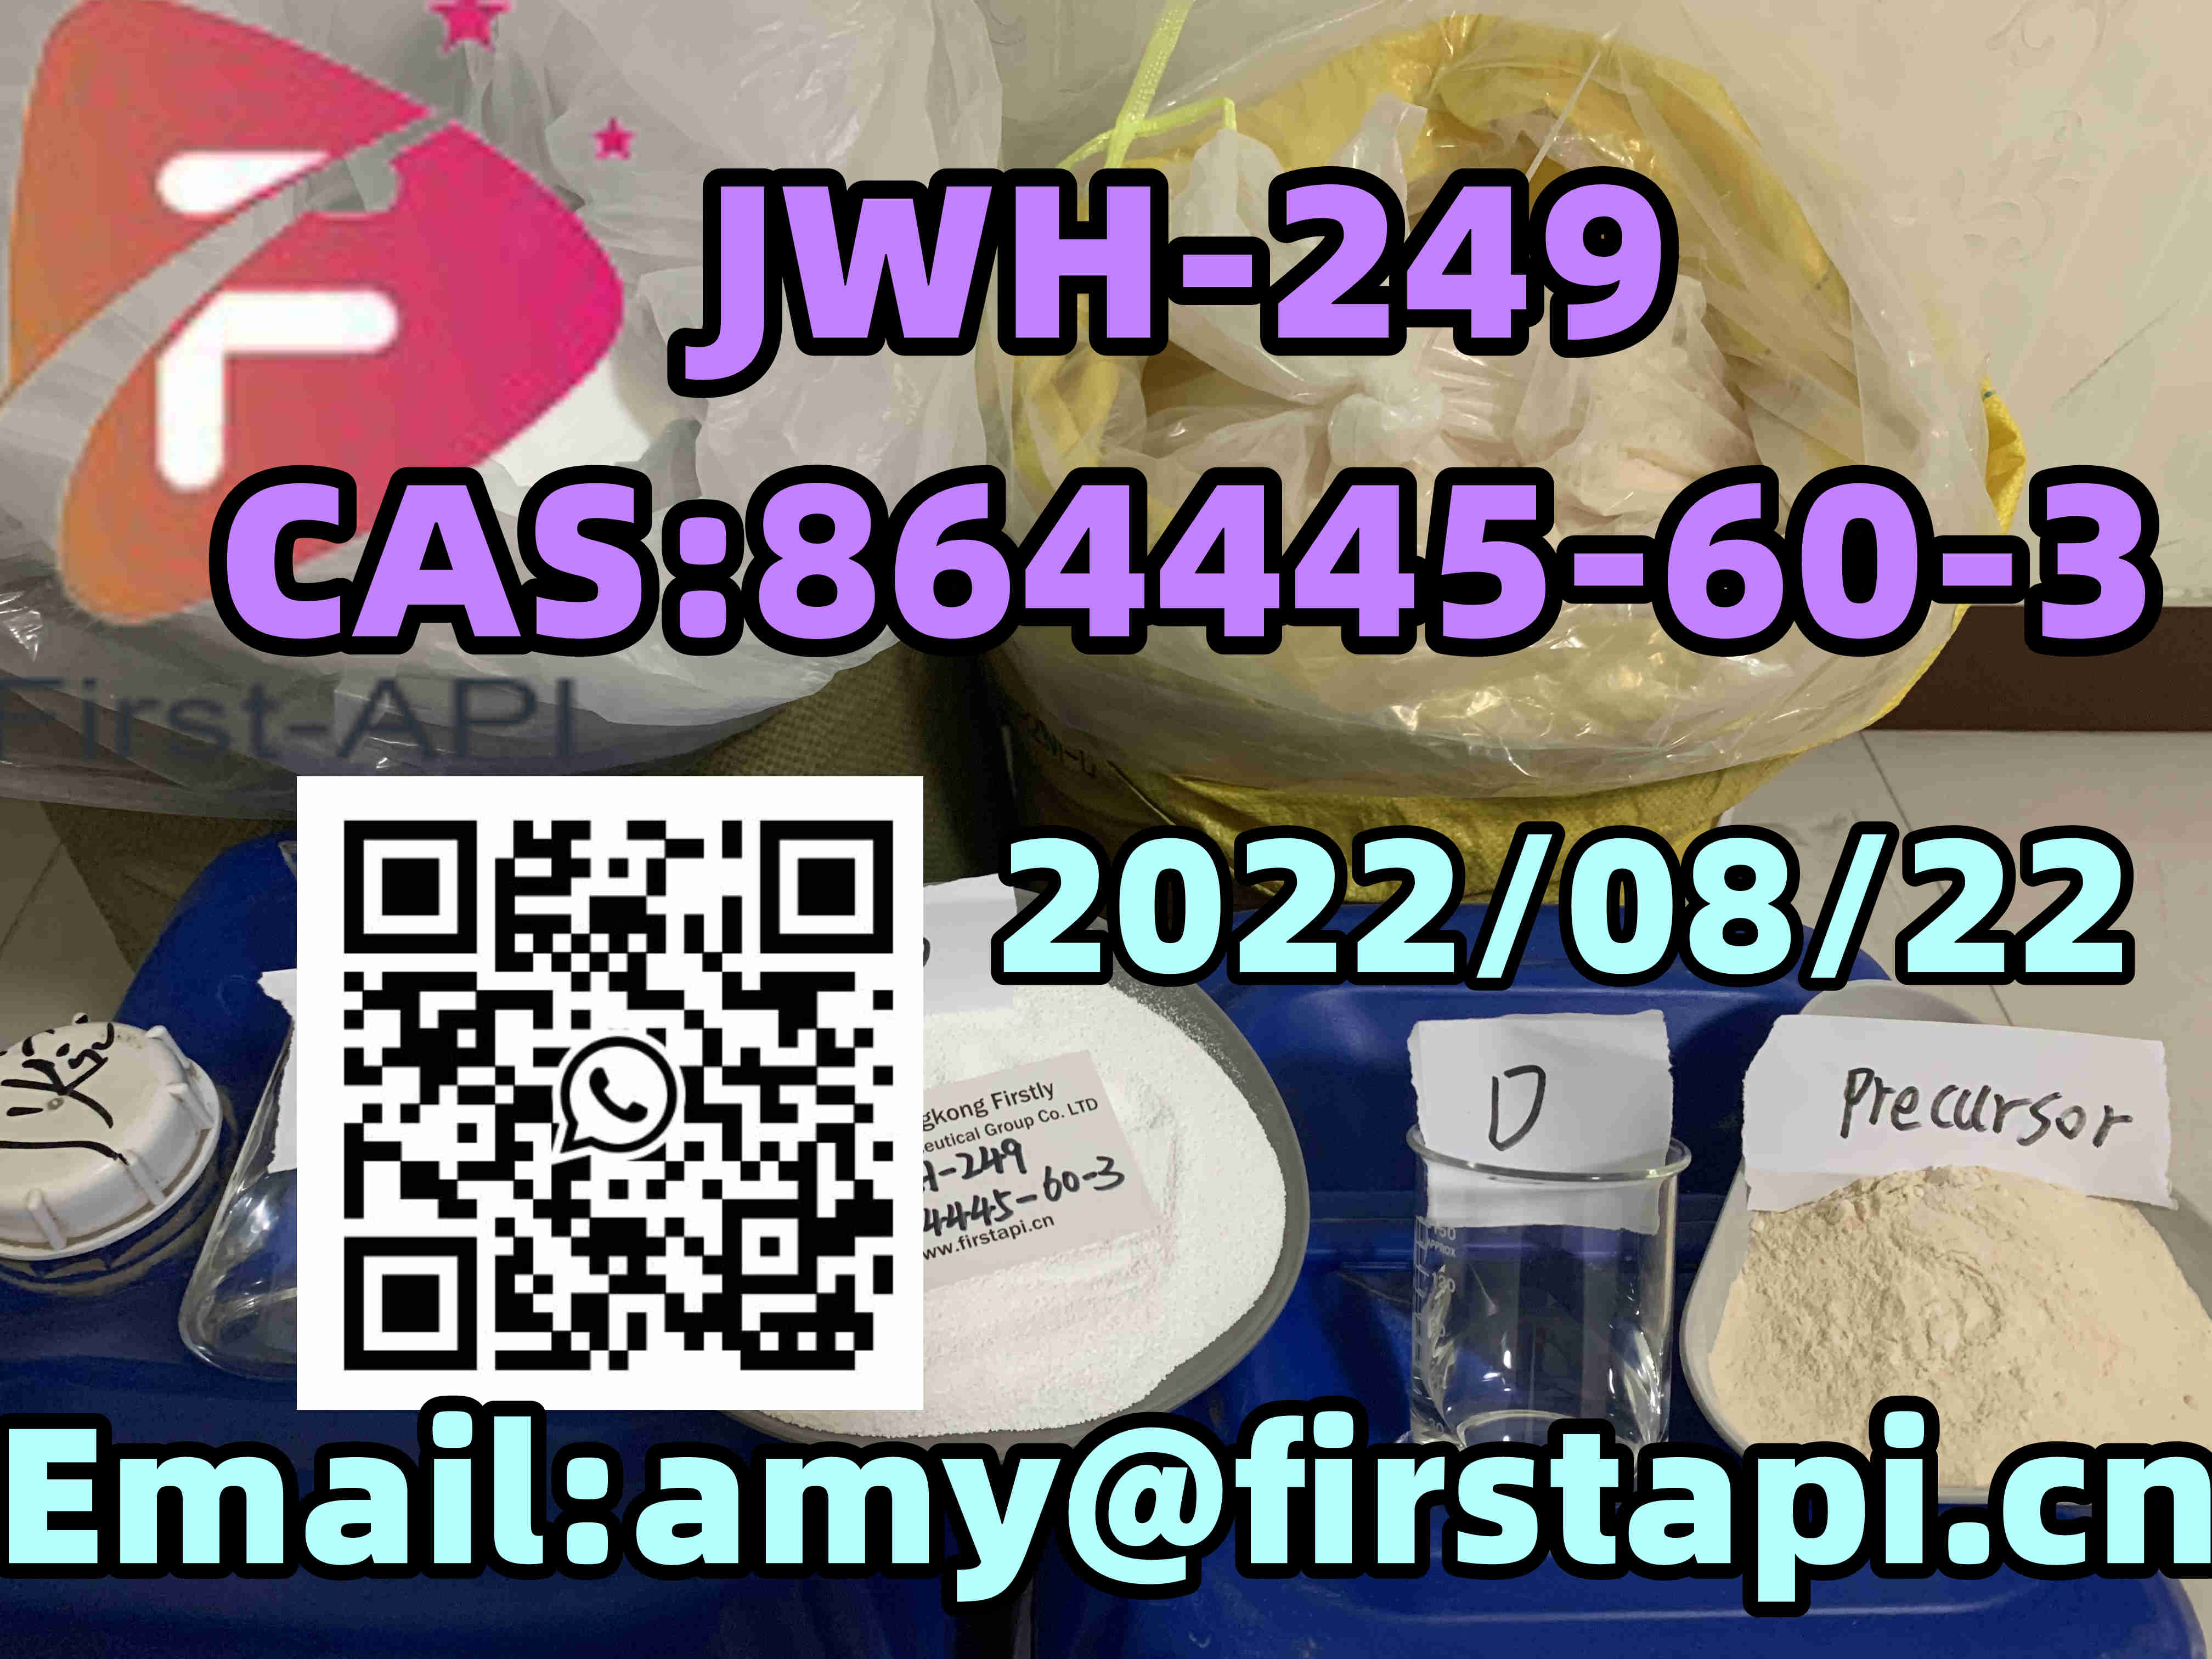 High quality,low price,JWH-249,CAS:864445-60-3,fast delivery - photo